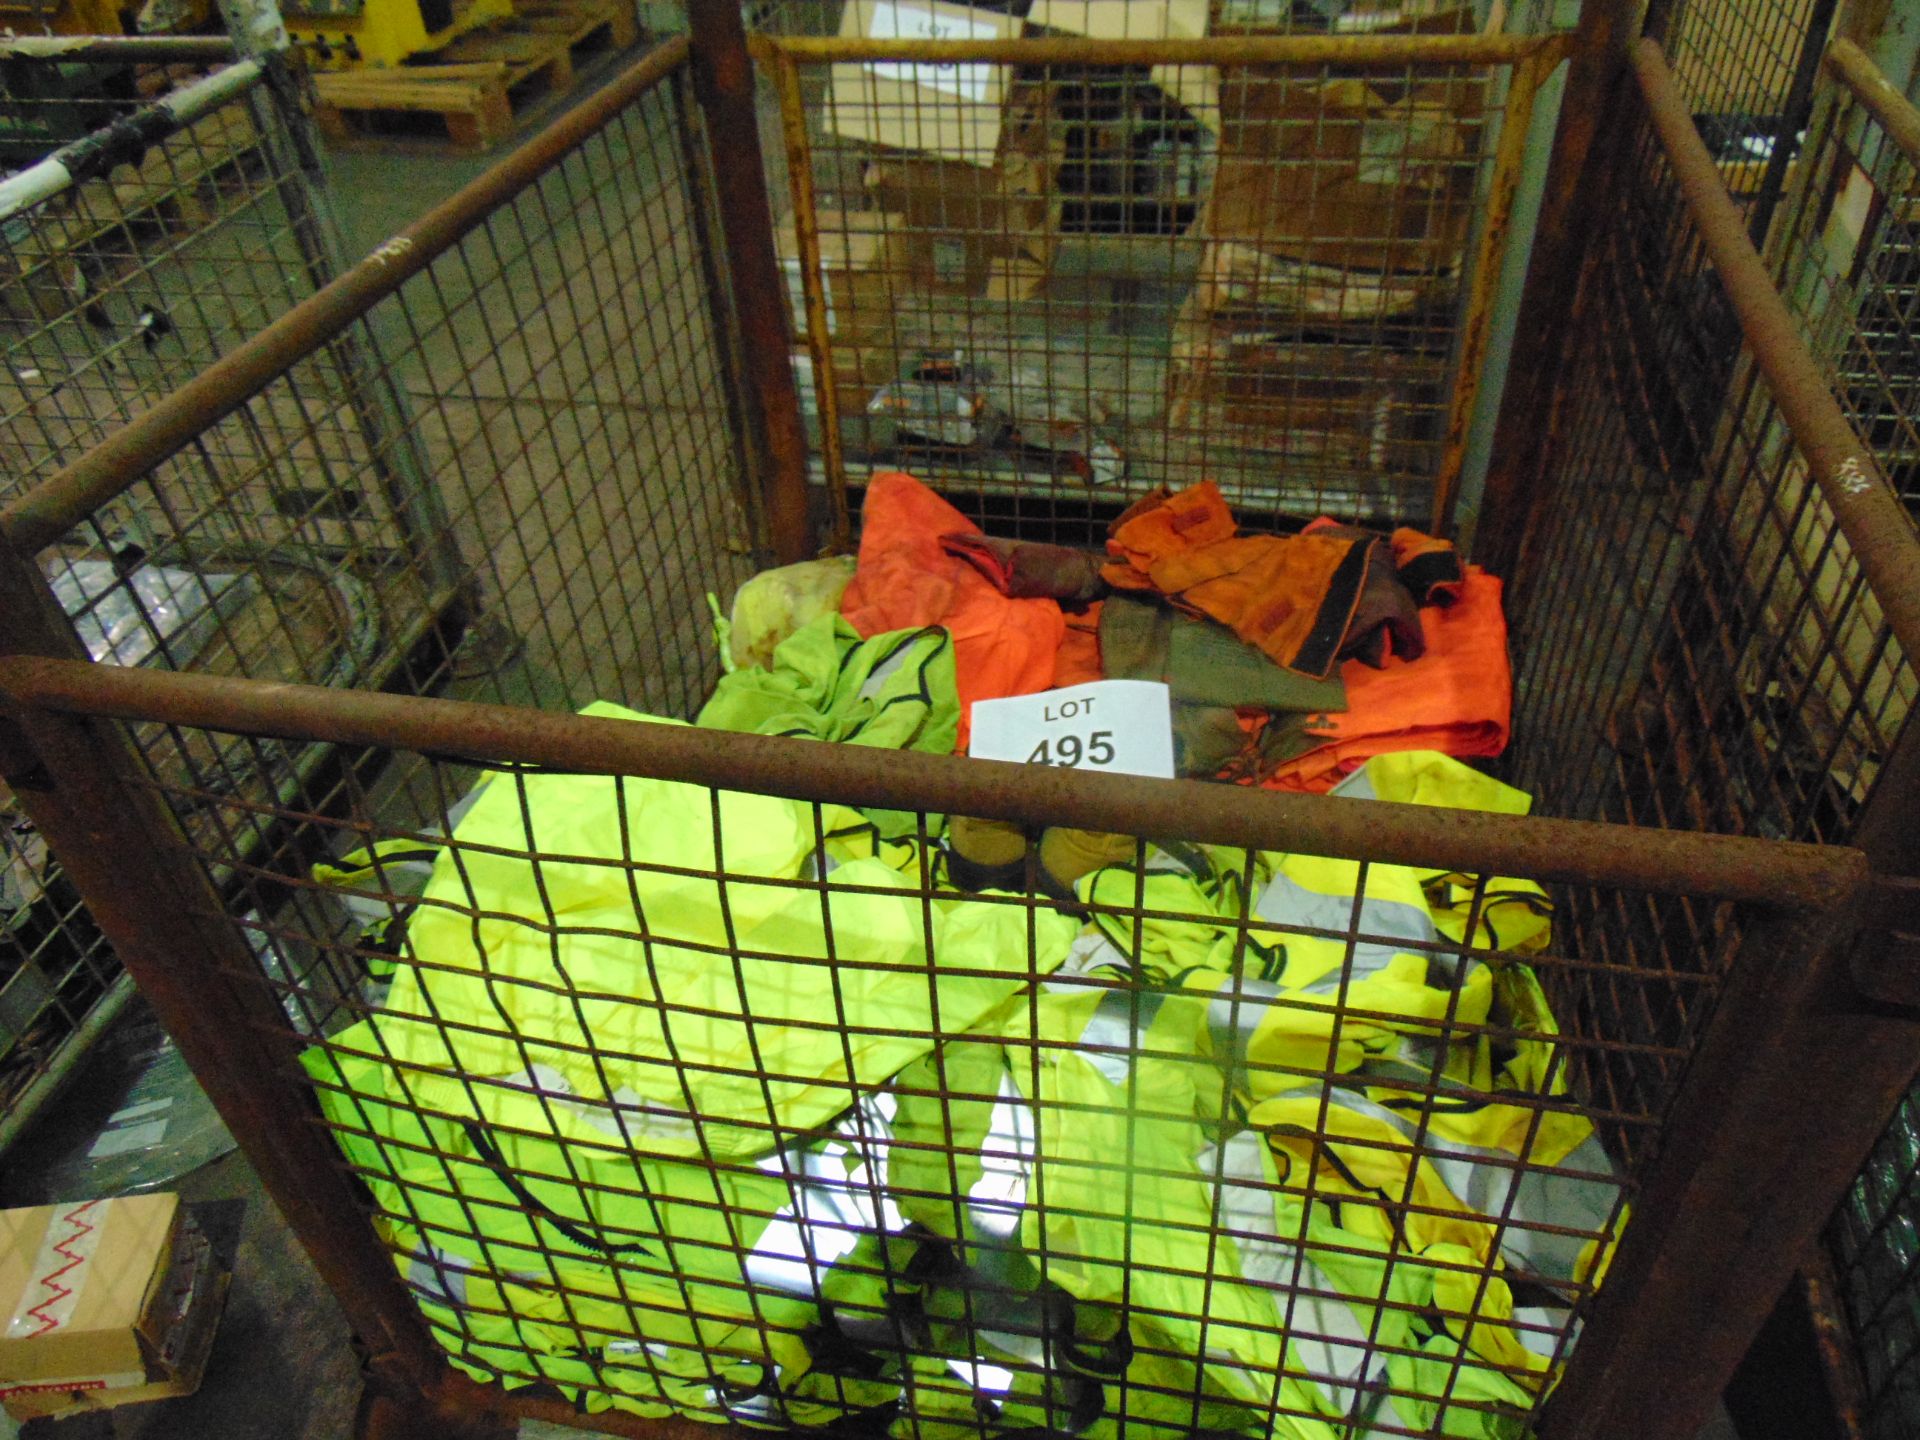 1X STILLAGE OF SAFETY PROTECTIVE CLOTHING INCLUDING VESTS, TROUSERS, JACKETS, ETC